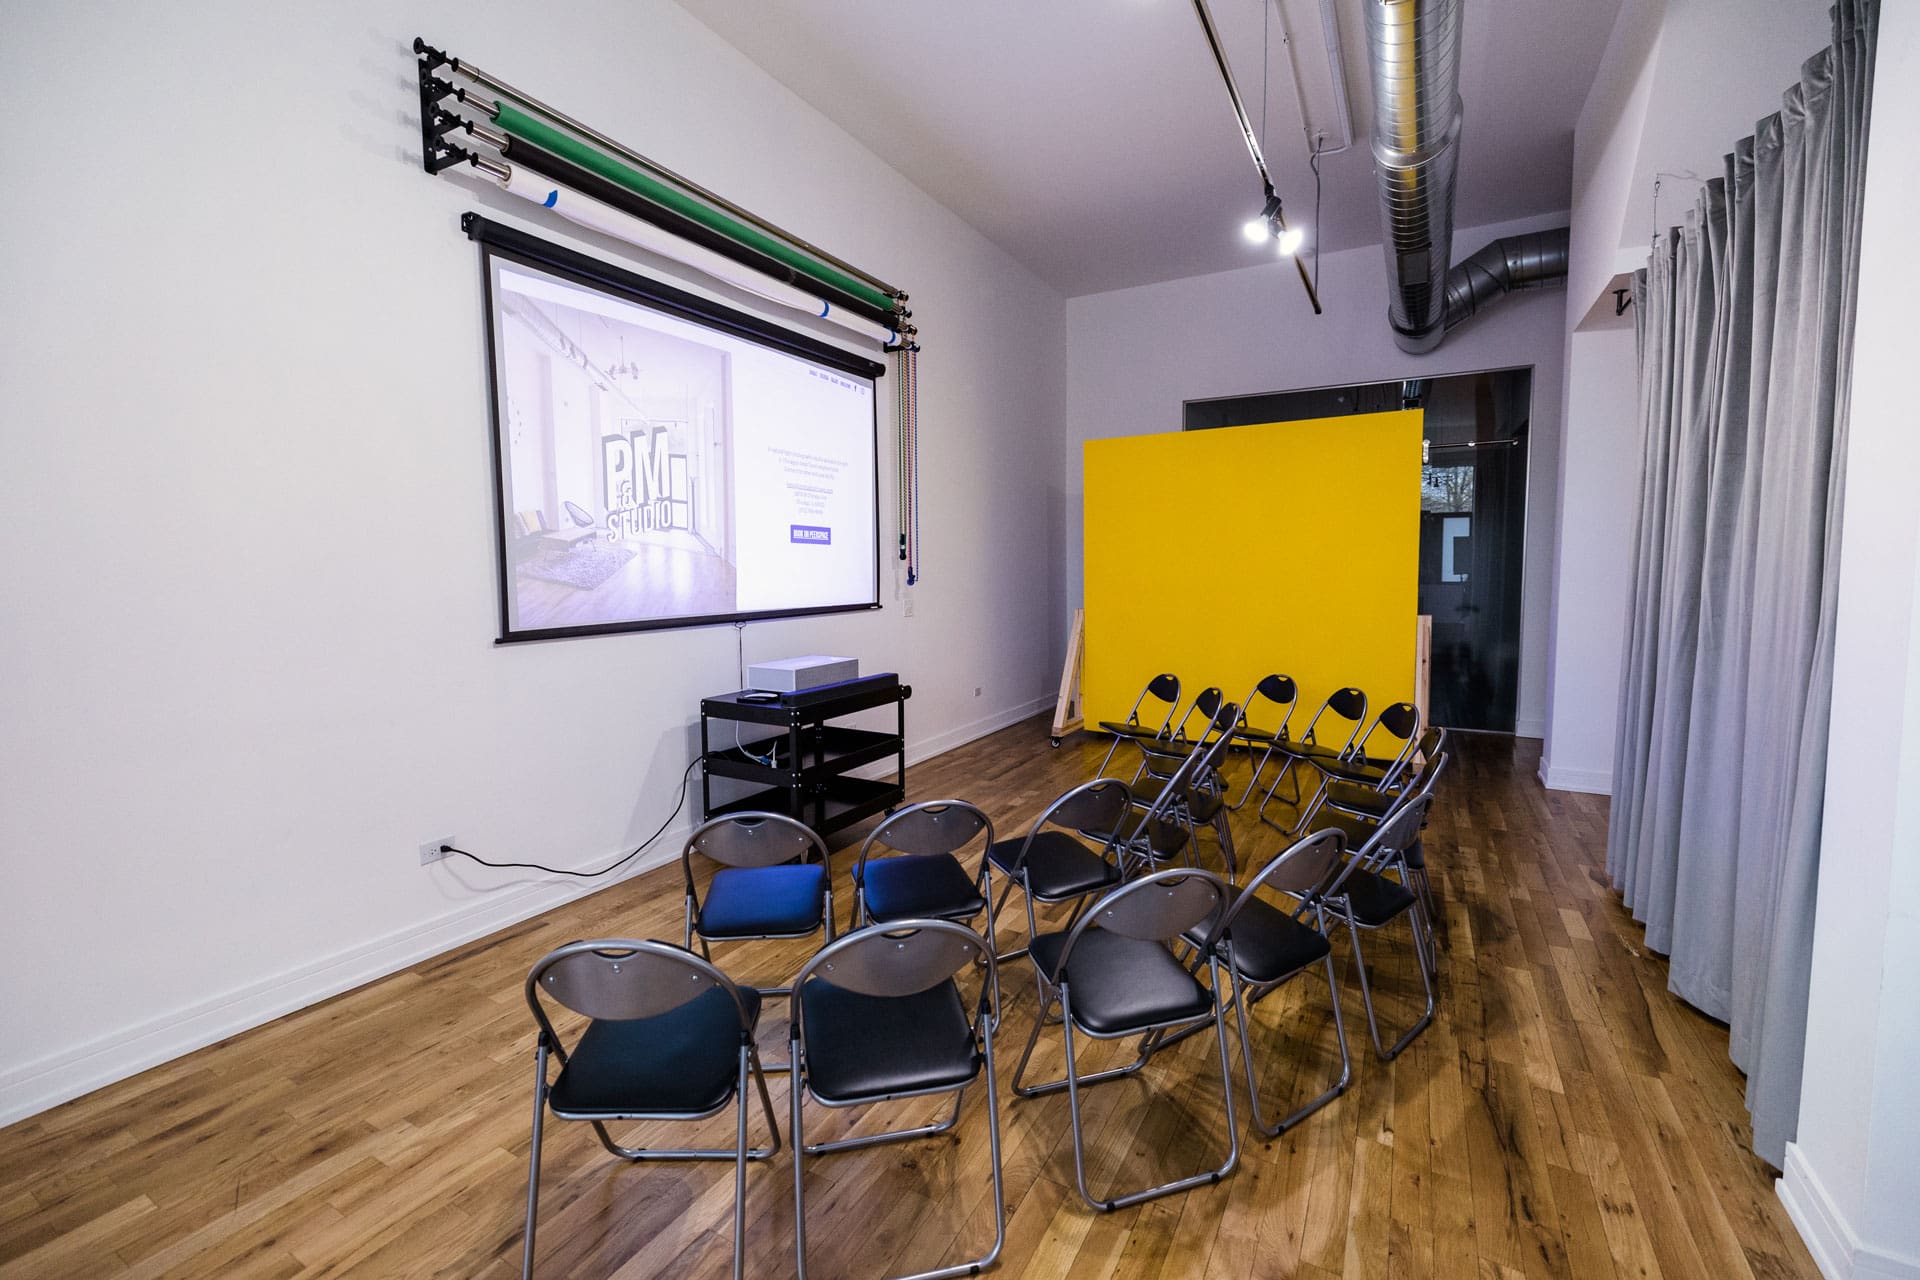 Meeting space with chairs set up to face projector screen at P&M Studio in Chicago's West Town neighborhood